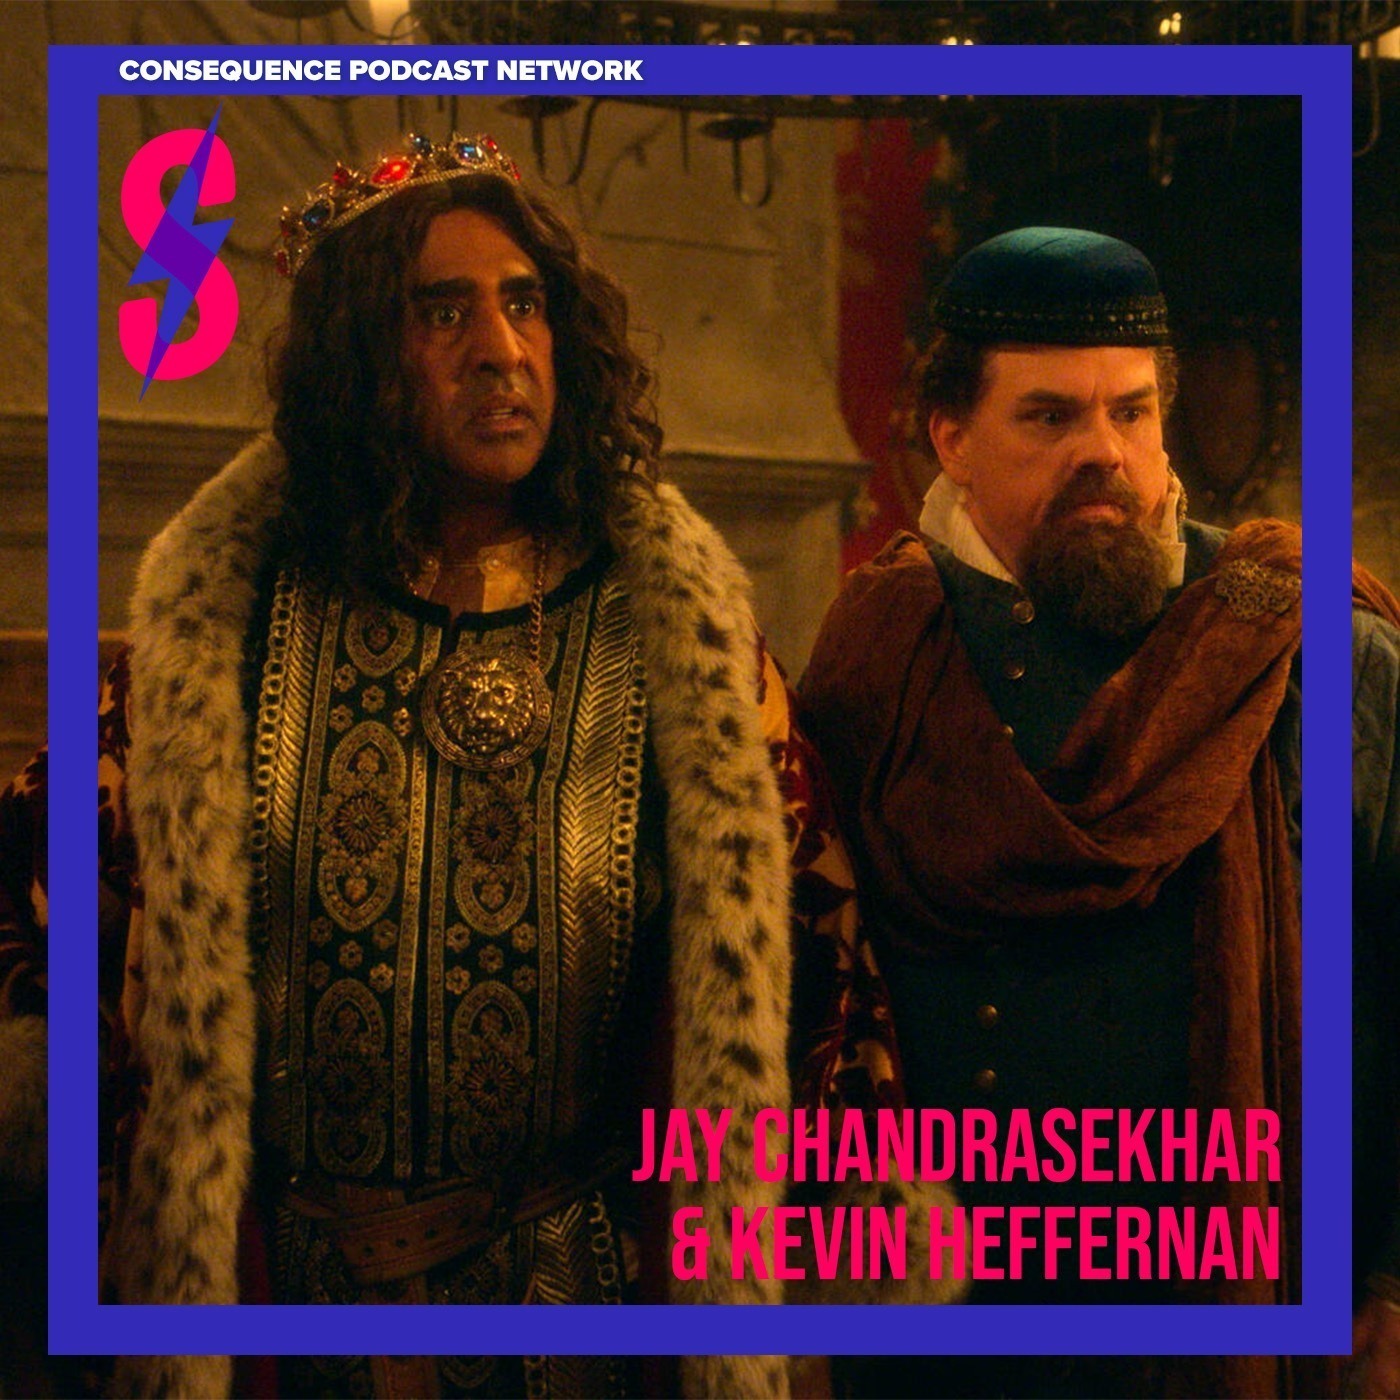 Two Comedy Legends On... Two Comedy Legends: Broken Lizard's Jay Chandrasekhar And Kevin Heffernan Are Sparked By 48 Hrs And A Wild And Crazy Guy